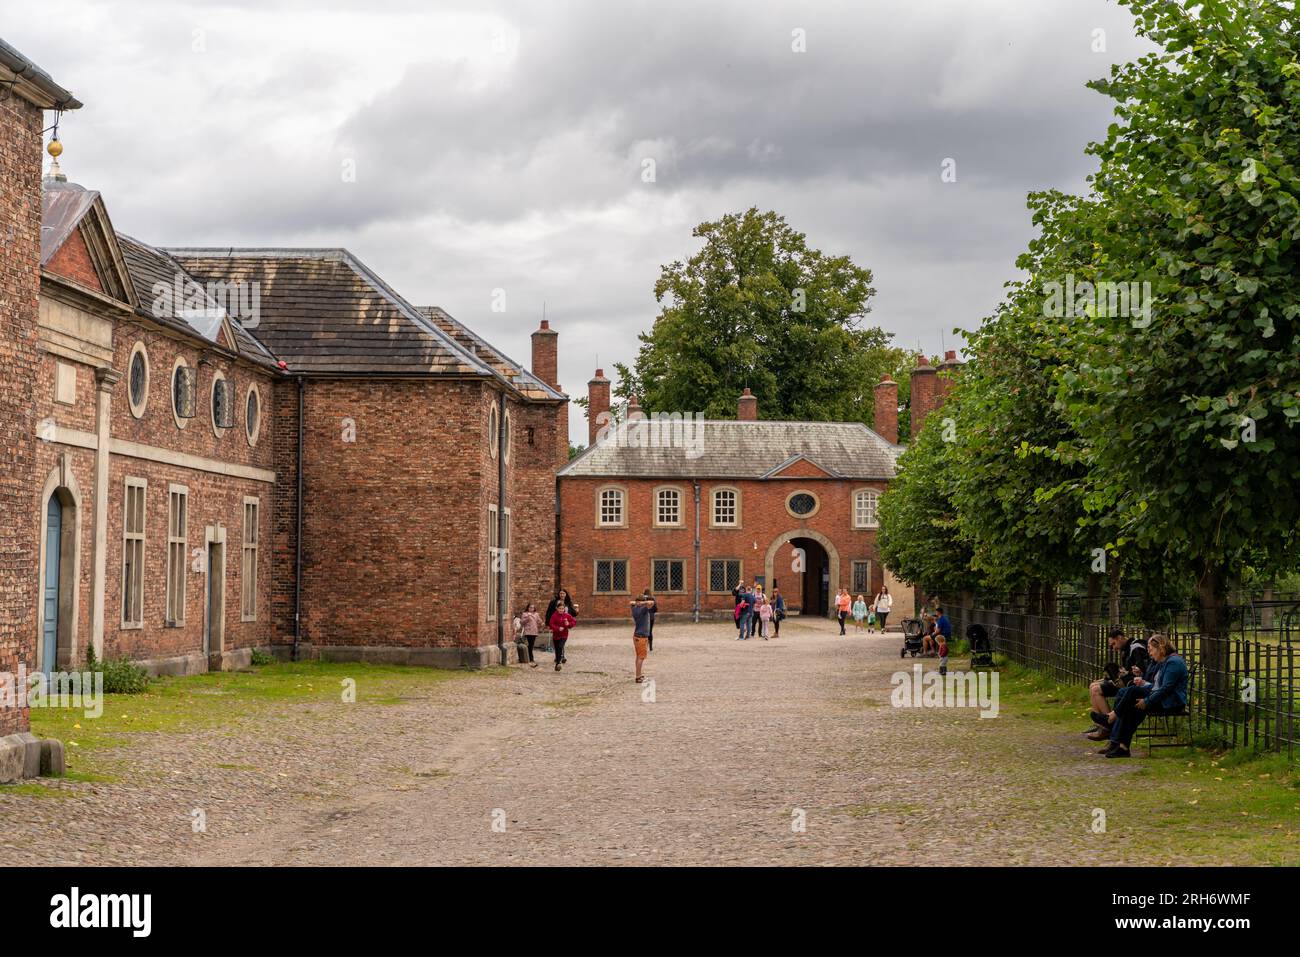 Dunham massey stables and court yard Stock Photo